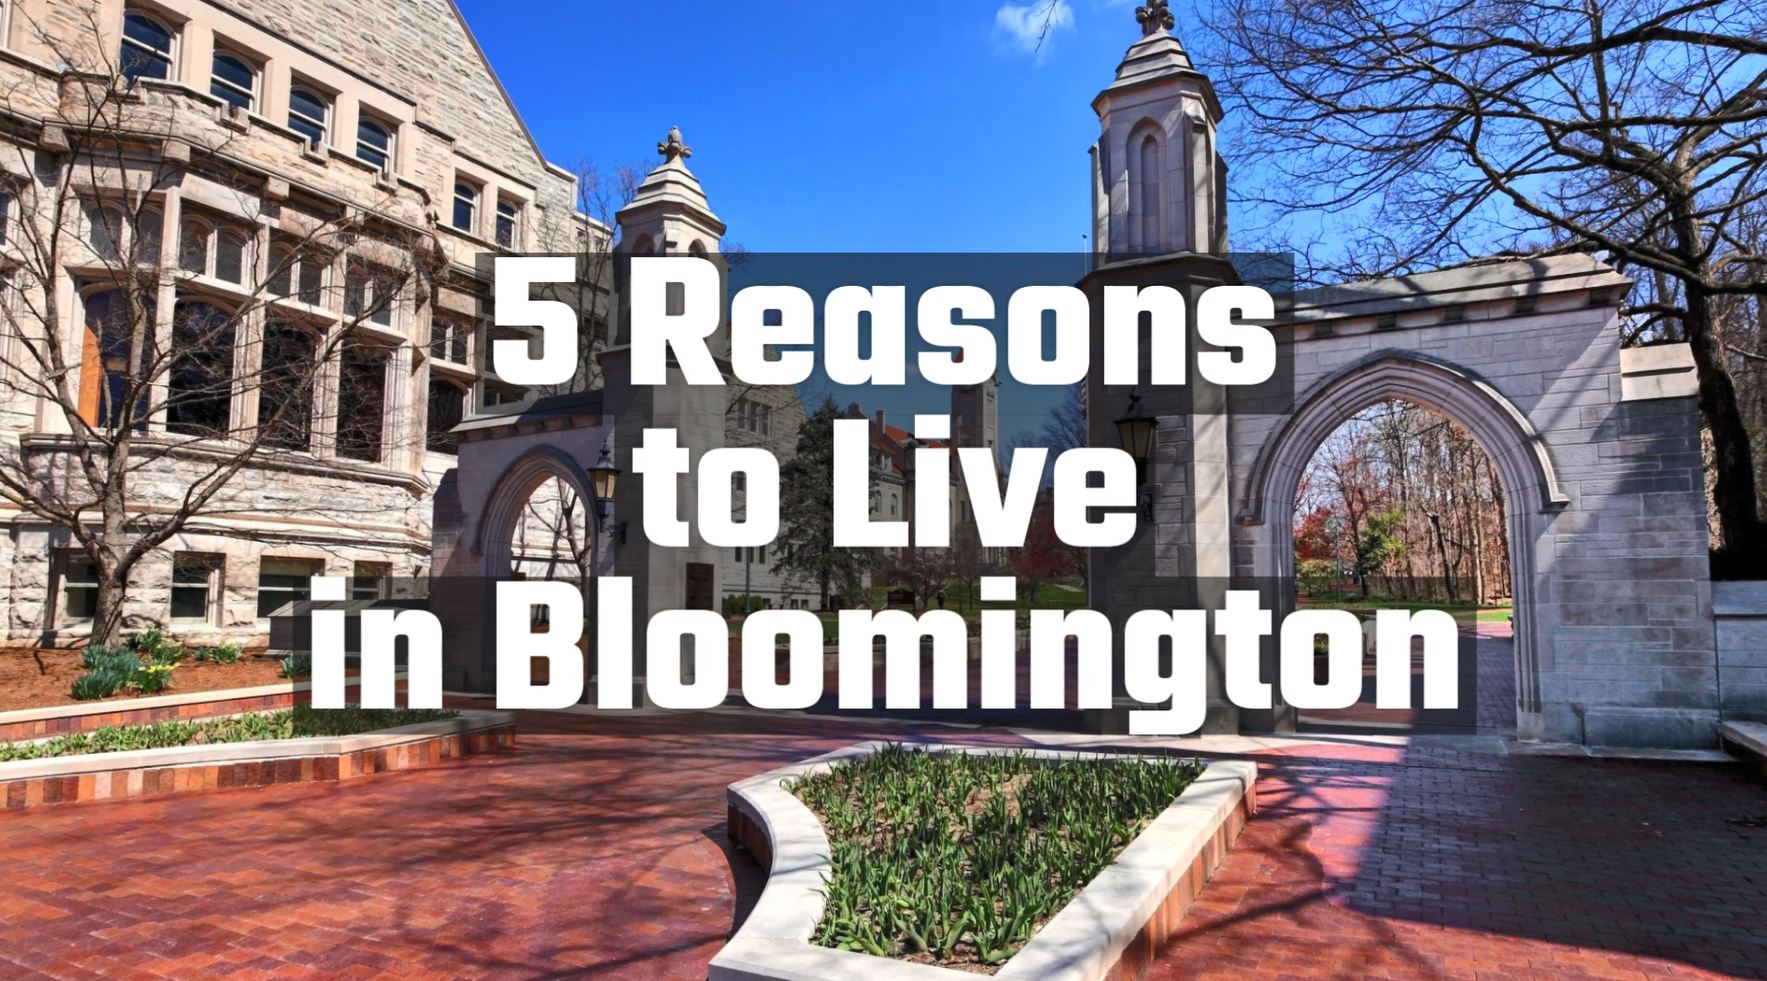 5_Reasons_to_Live_in_Bloomington_1080p - Final